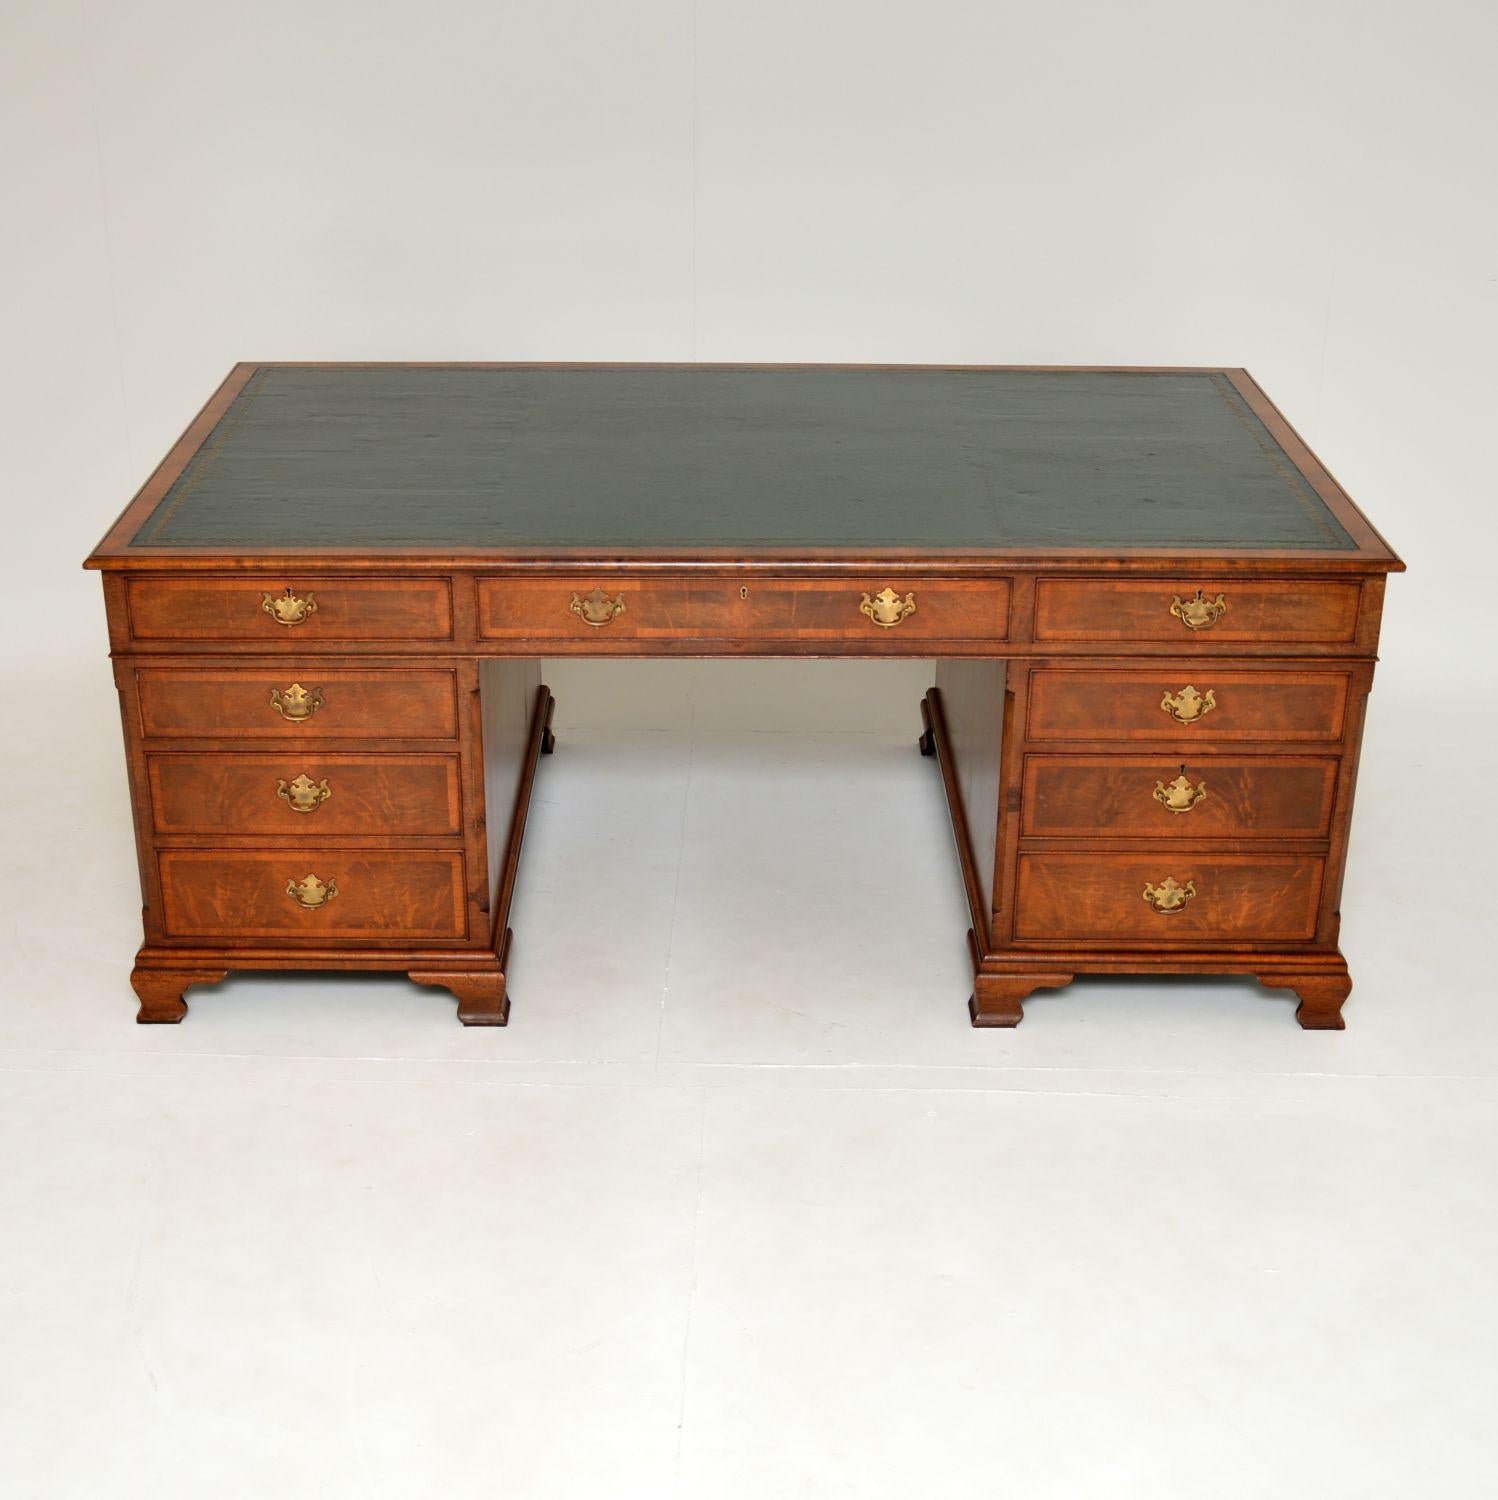 A very large and impressive figured walnut partners desk, in the antique Georgian style. This was made in England, it dates from around the 1950’s period.
The quality is outstanding, this is extremely well built and is of great proportions. The